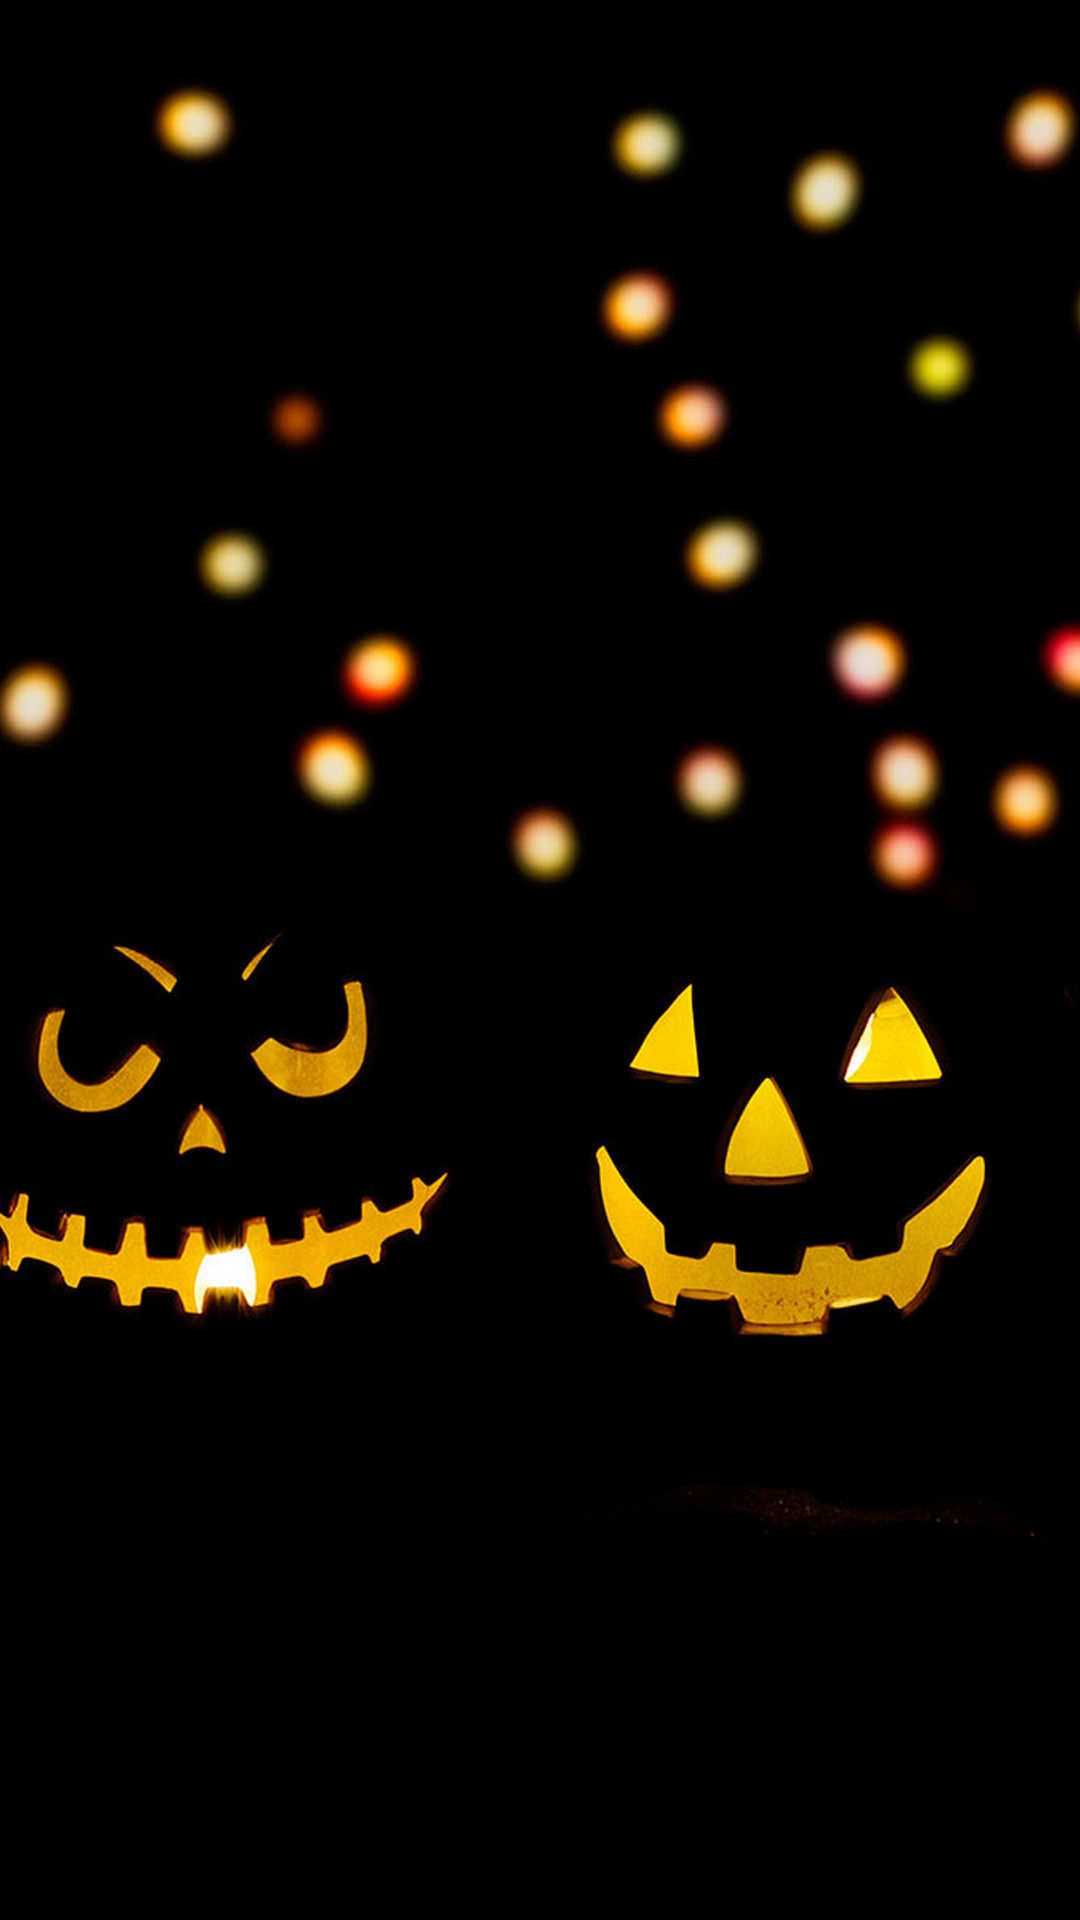 Phones Wallpaper Cute Halloween with high-resolution 1080x1920 pixel. Download all Mobile Wallpapers and Use them as wallpapers for your iPhone, Tablet, iPad, Android and other mobile devices